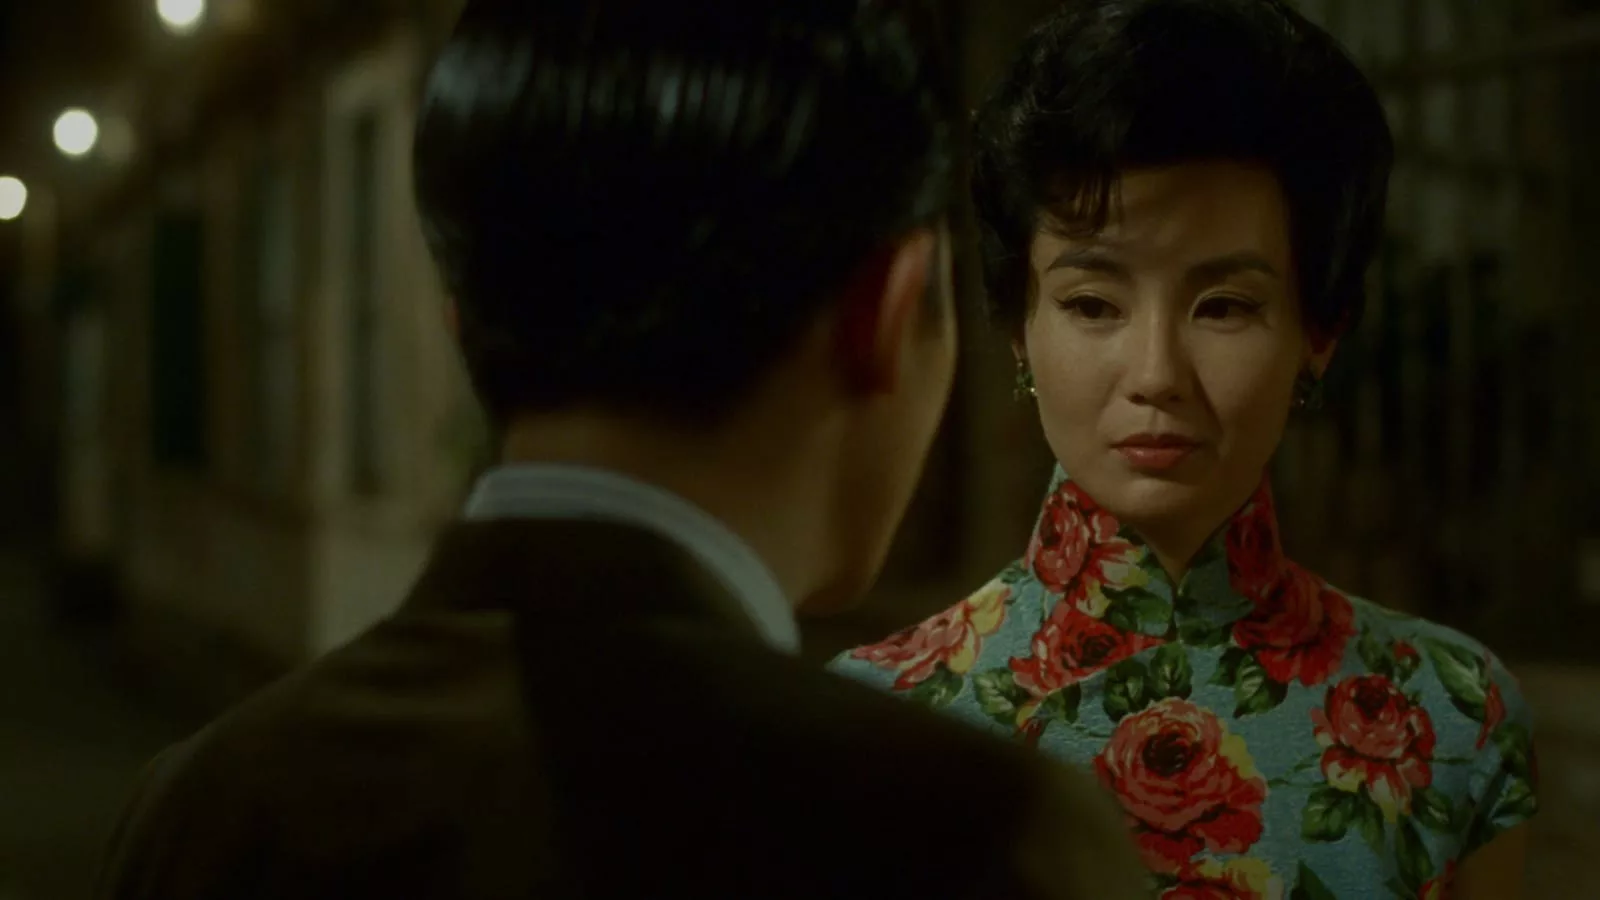 In Wong Kar Wai's In the Mood for Love drama, Chow Mo-wan (by Tony Leung Chiu-wai) runs into his neighbor Su Li-zhen in a flowered dress (Maggie Cheung Man-yuk) as they fall in love with each other